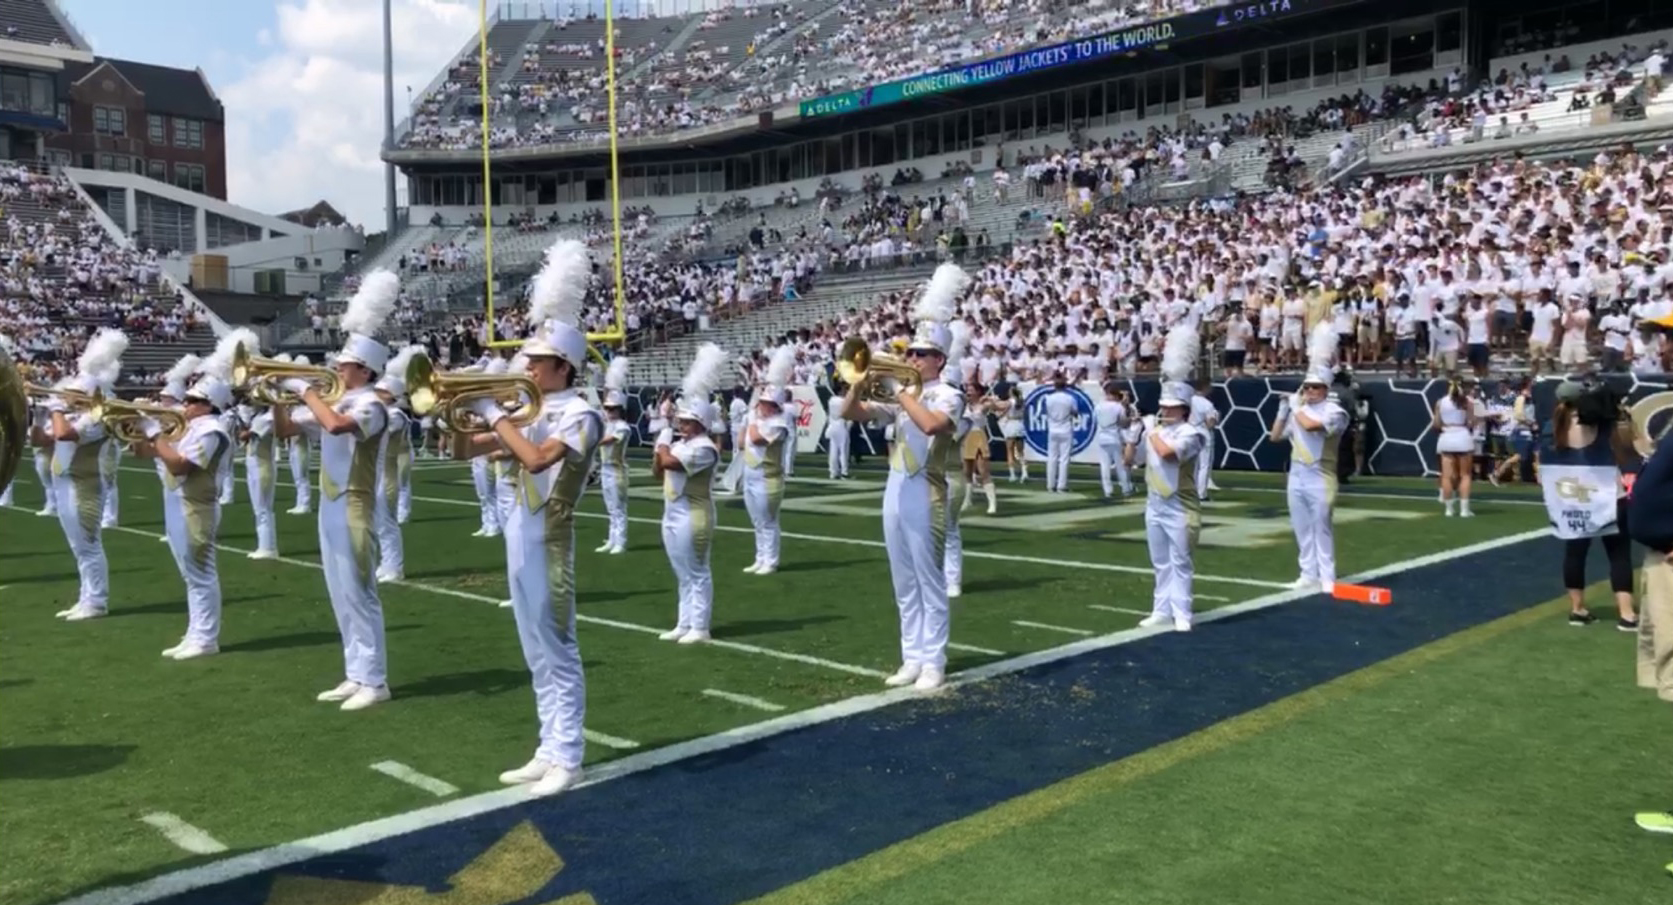 The marching band halts on the field during their pregame performance.